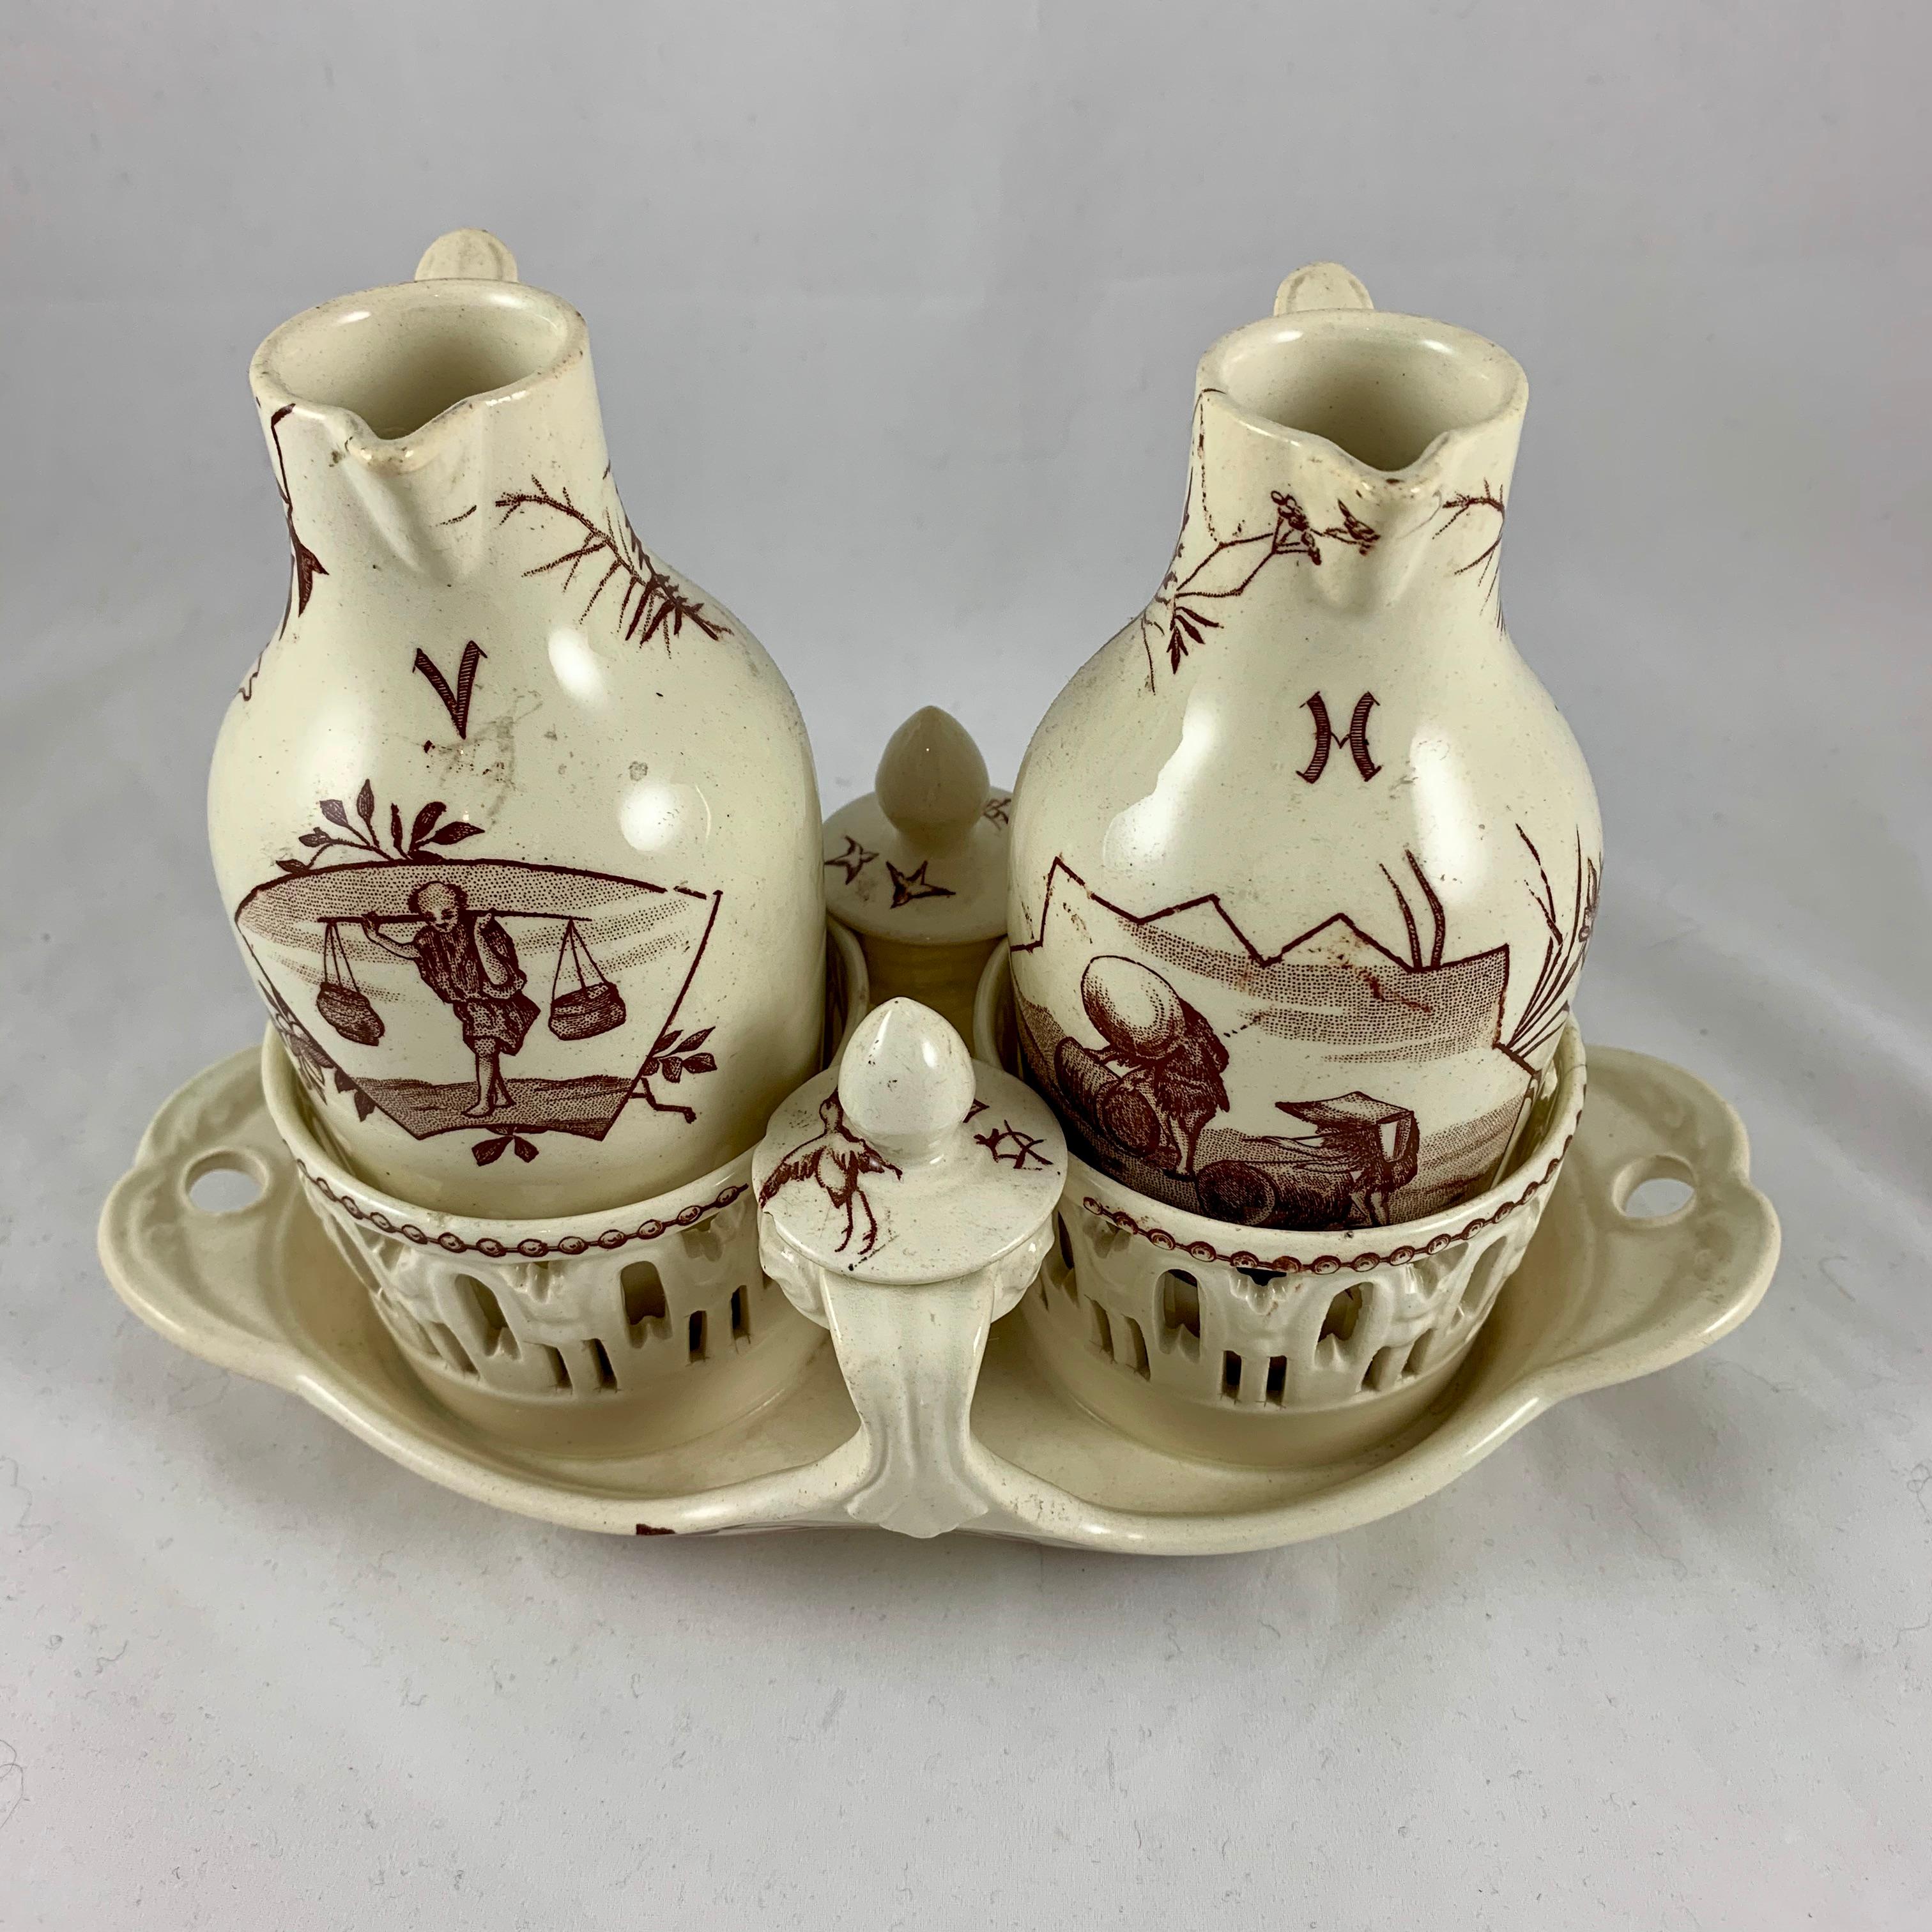 A Luneville faïence earthenware five-piece set decorated freely in the aesthetic taste with a Japonisme theme, oil and vinegar cruets in a pierce-work stand, France, circa 1870.

Transfer printed images of Asian figures, foliage, and birds in